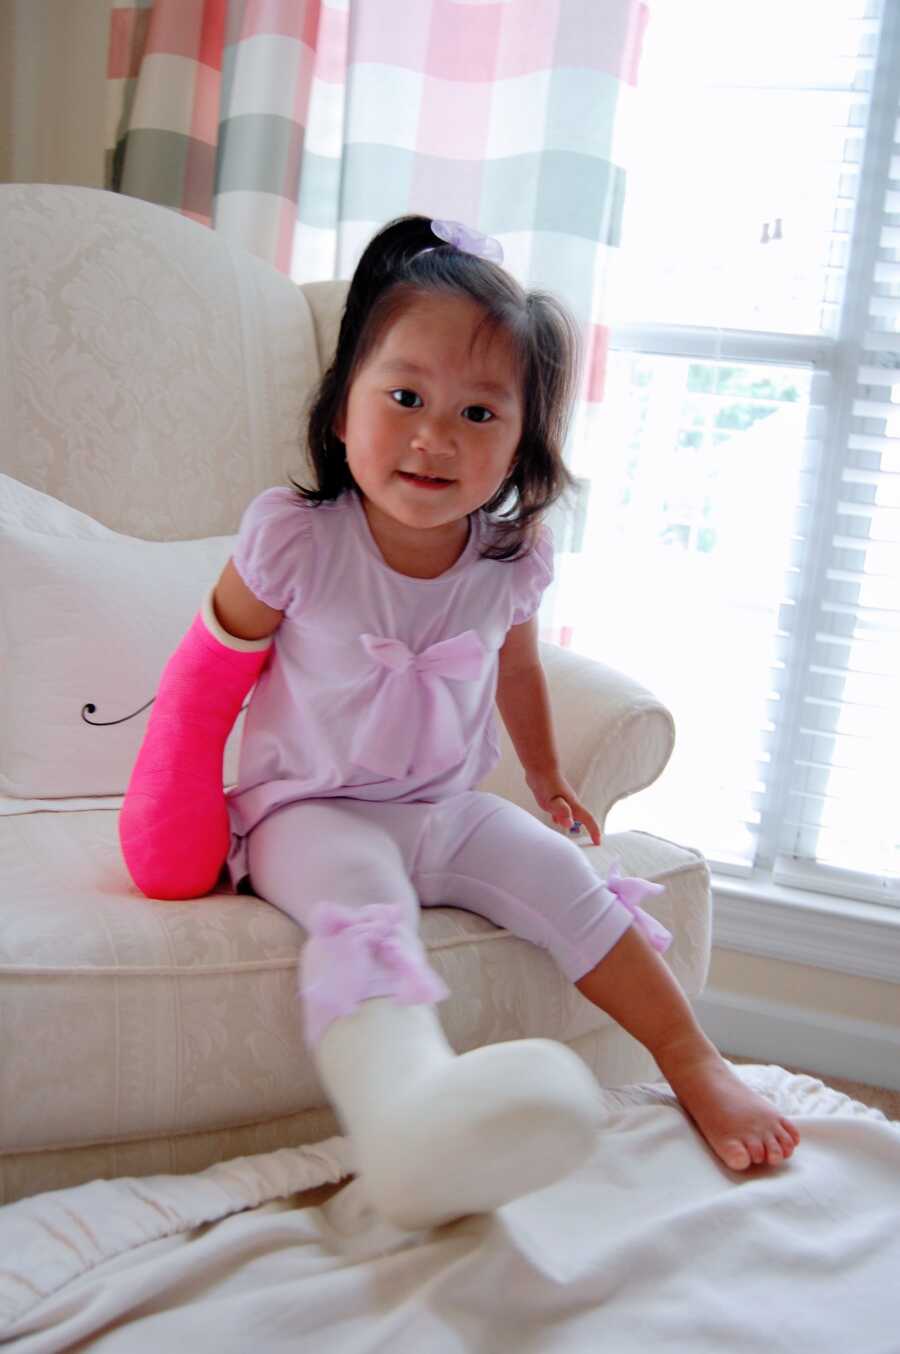 Small Chinese girl takes picture with casts on her hand and foot after surgery.